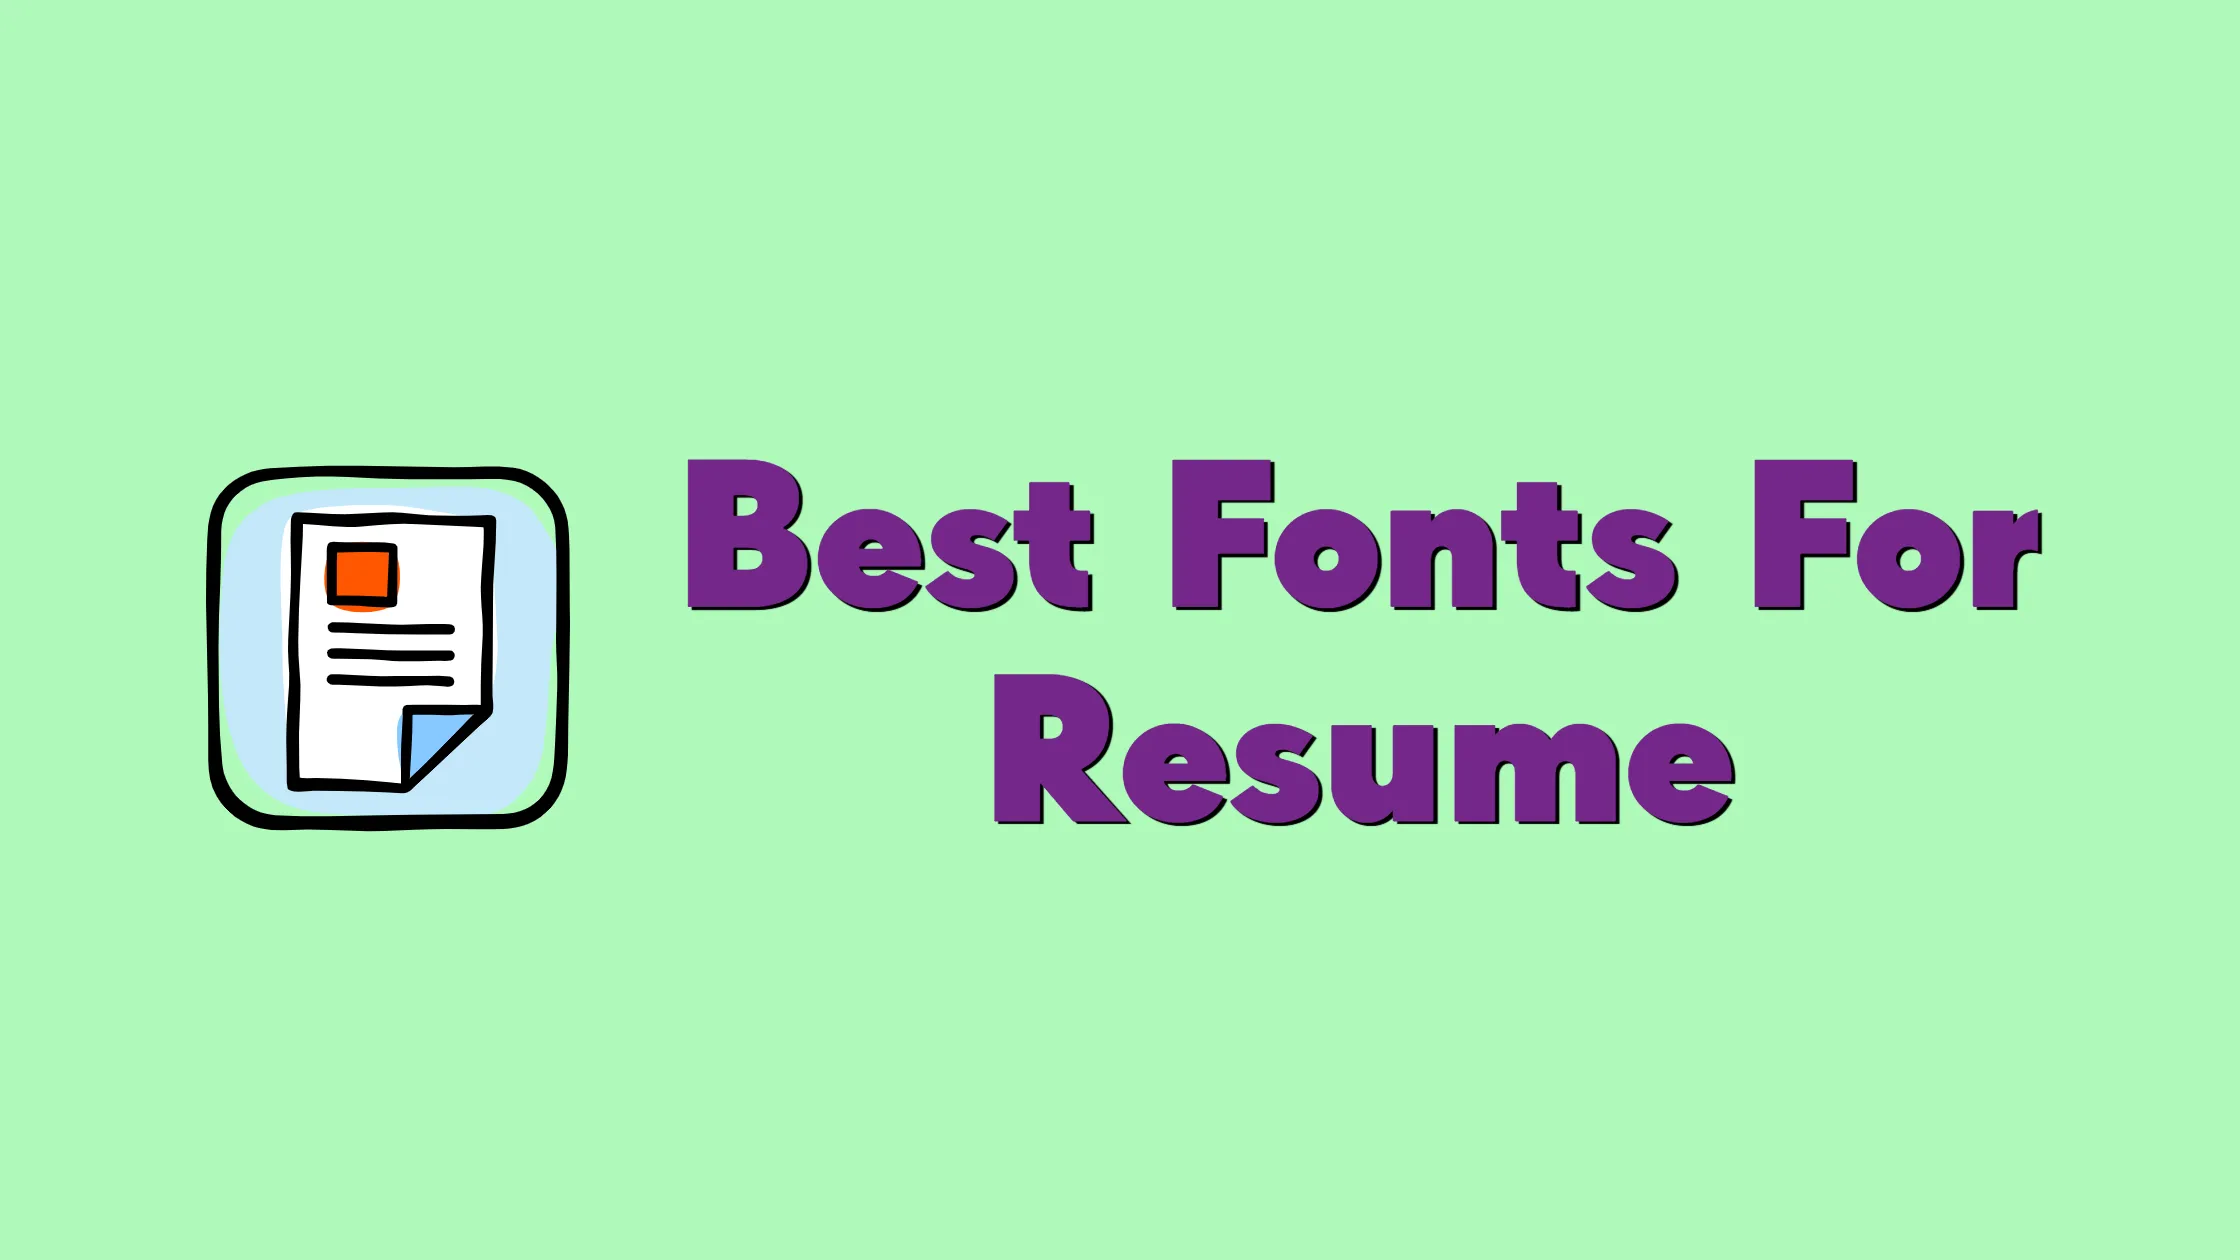 Get Hired Faster: Best Fonts For Resume